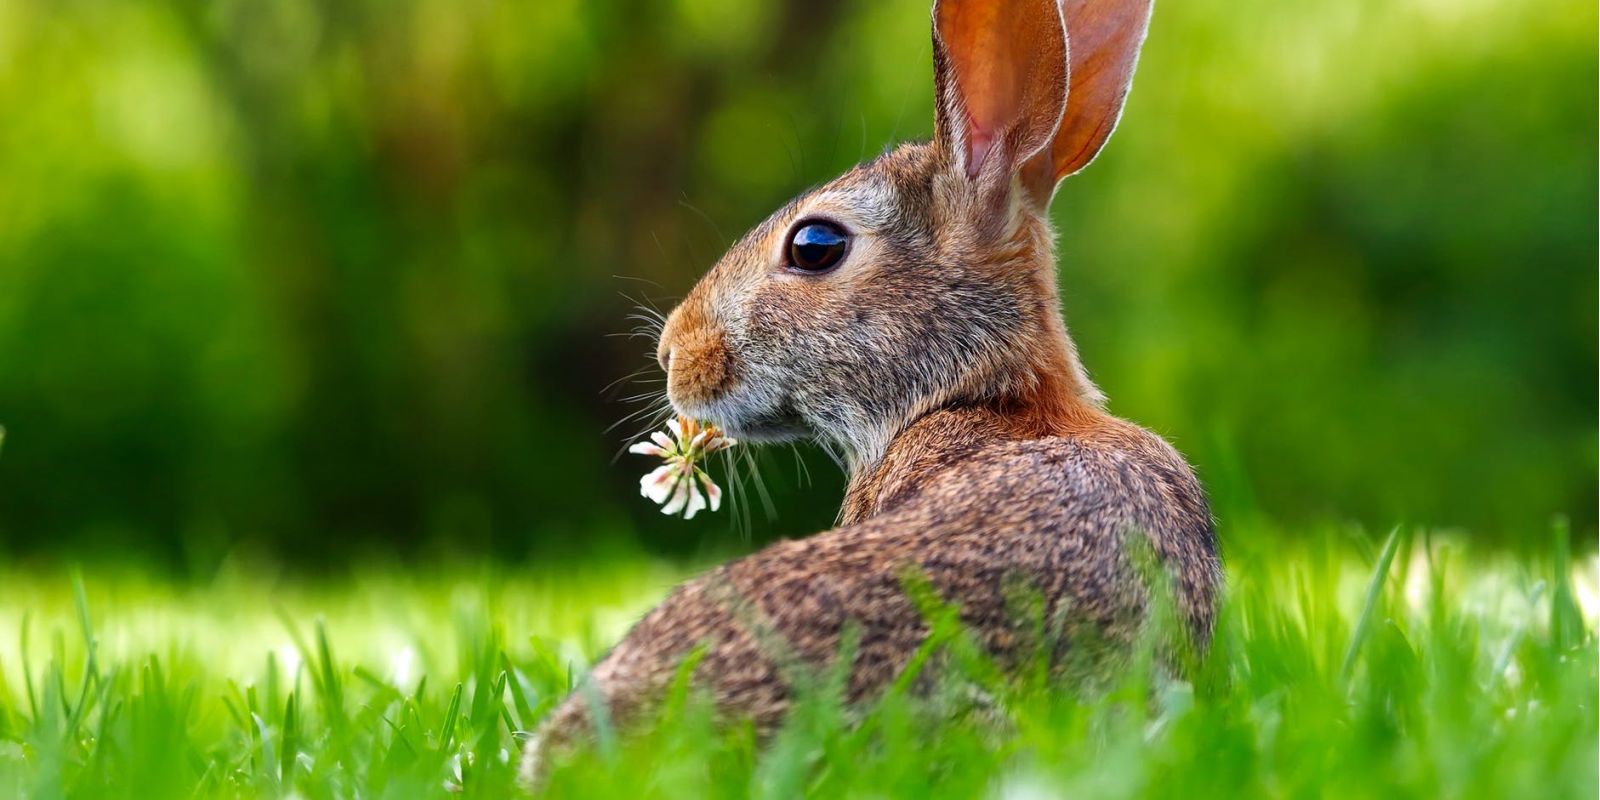 Easter Edition: Rabbits Are Frequent Victims Of Animal Cruelty admin ajax.php?action=kernel&p=image&src=%7B%22file%22%3A%22wp content%2Fuploads%2F2022%2F04%2Fpexels photo 255387